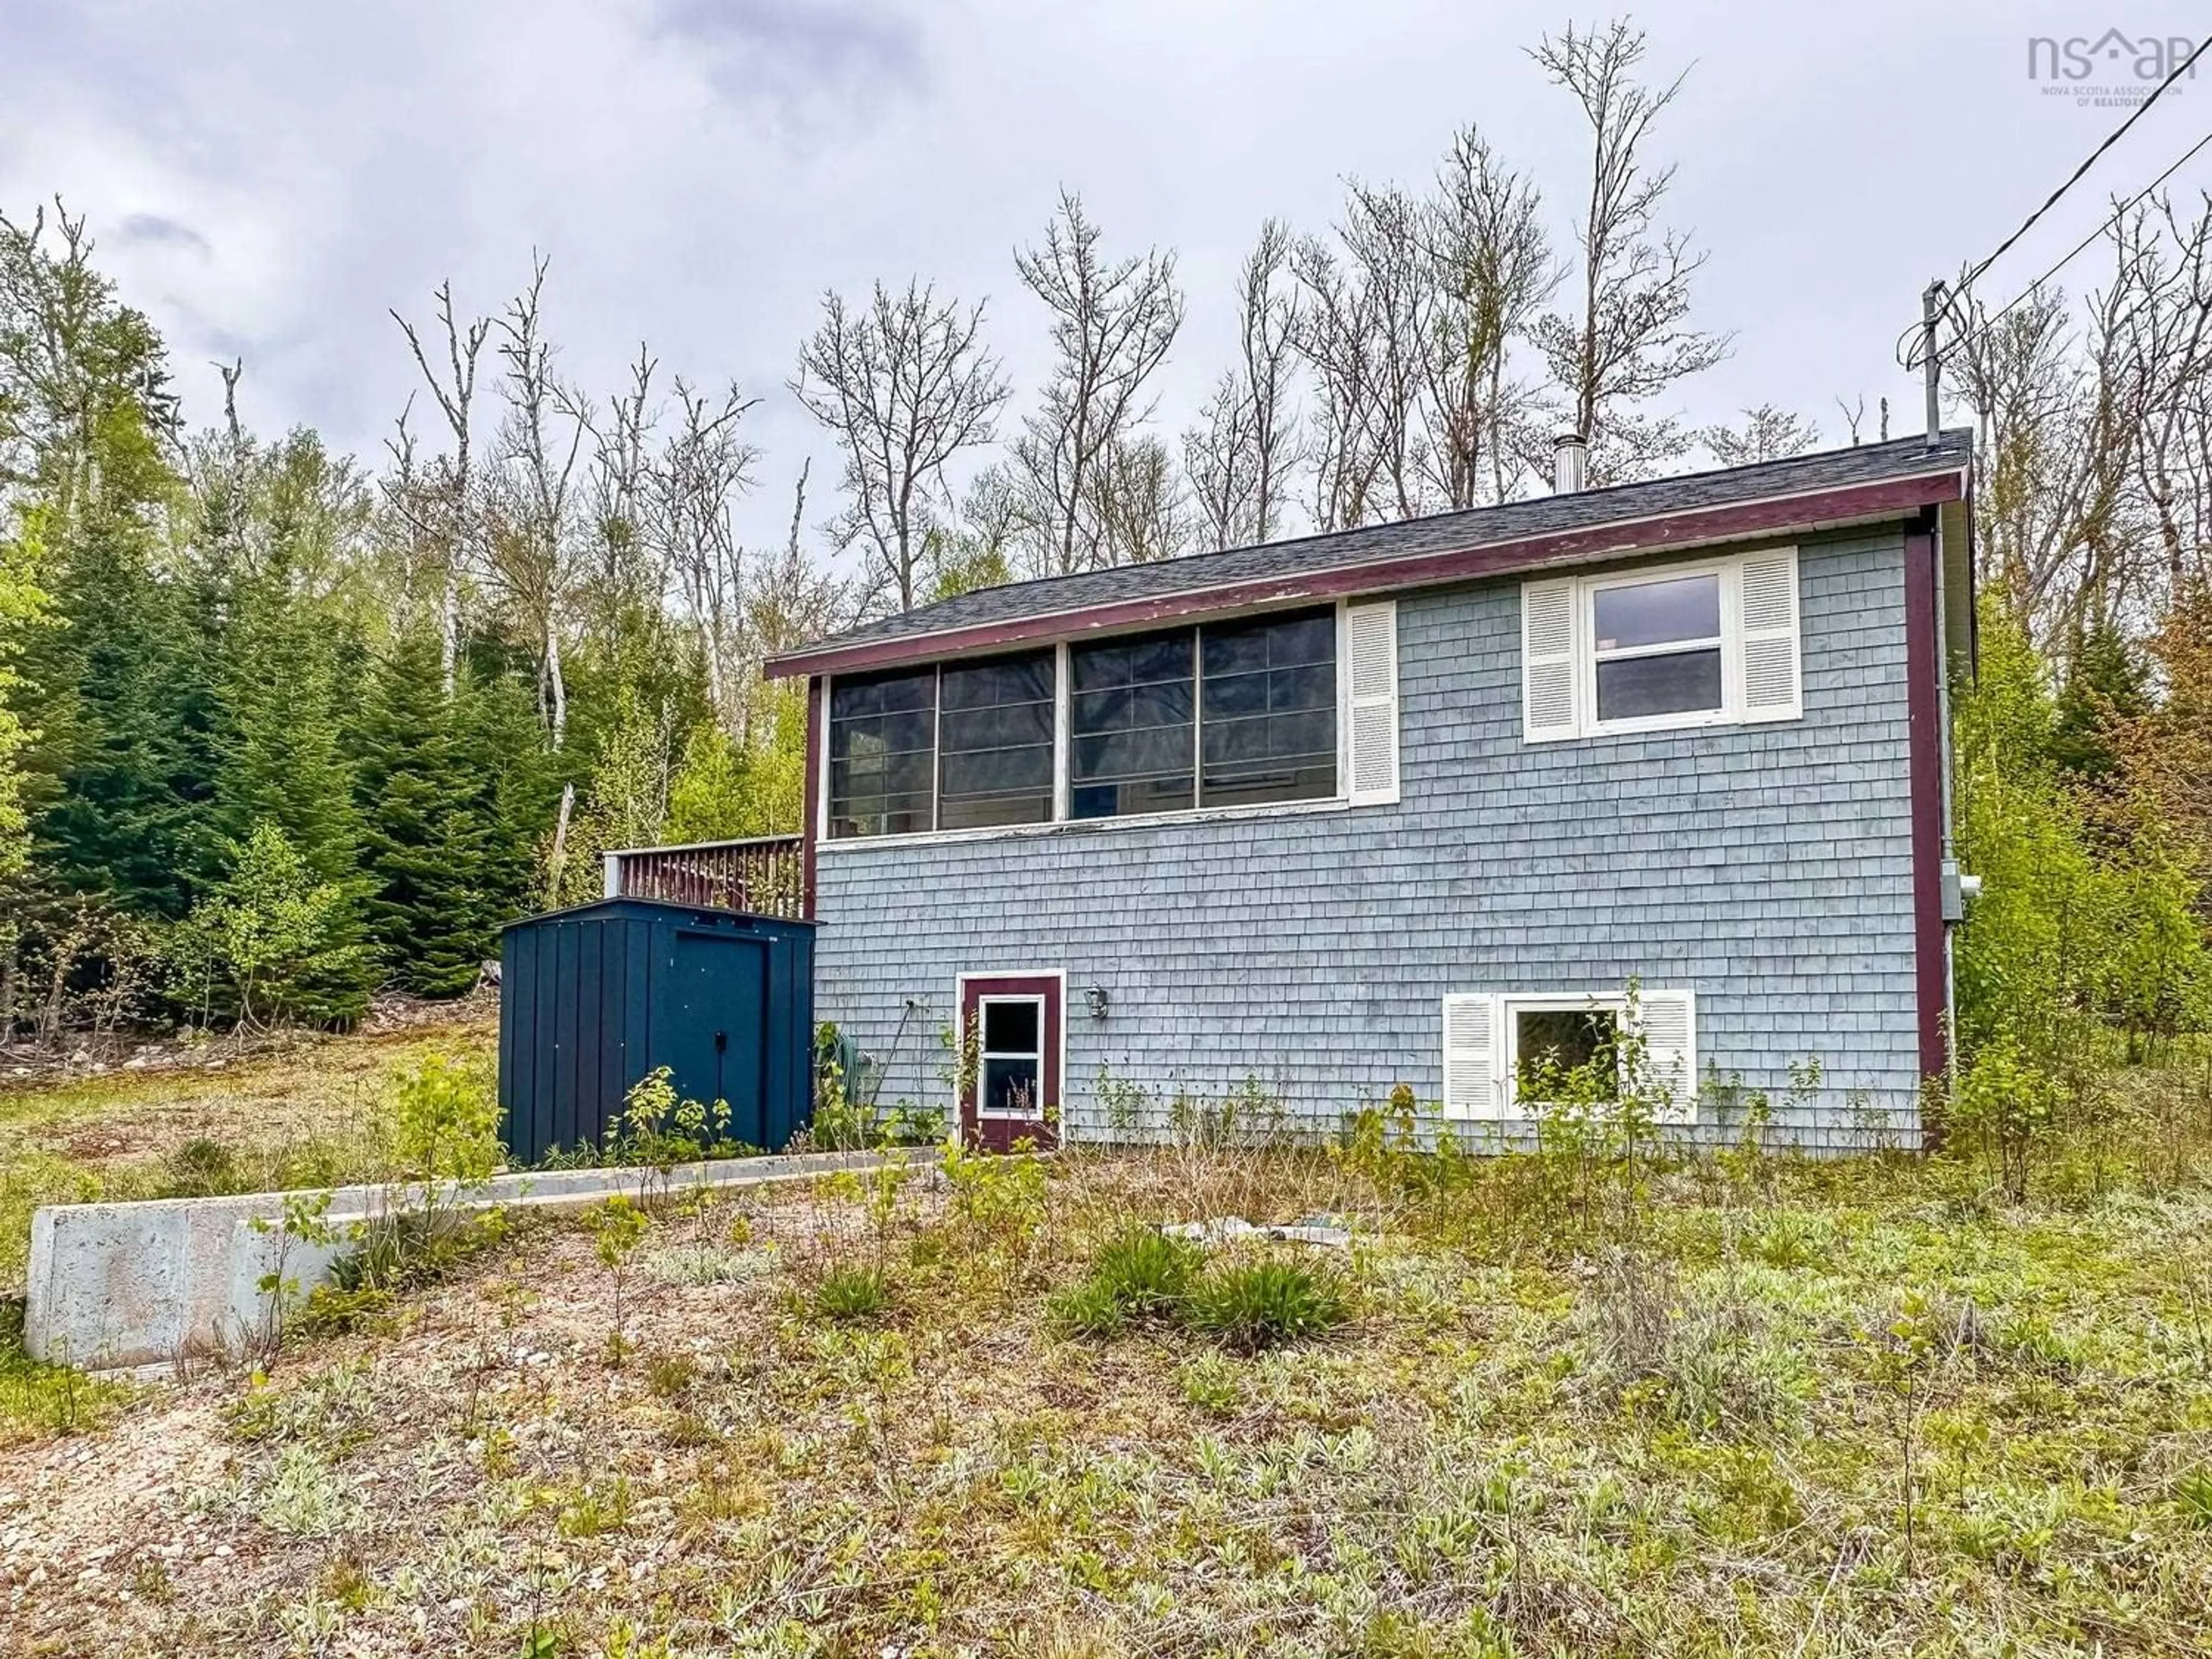 Home with unknown exterior material for 540 Lakecrest Dr, Armstrong Lake Nova Scotia B0P 1C0